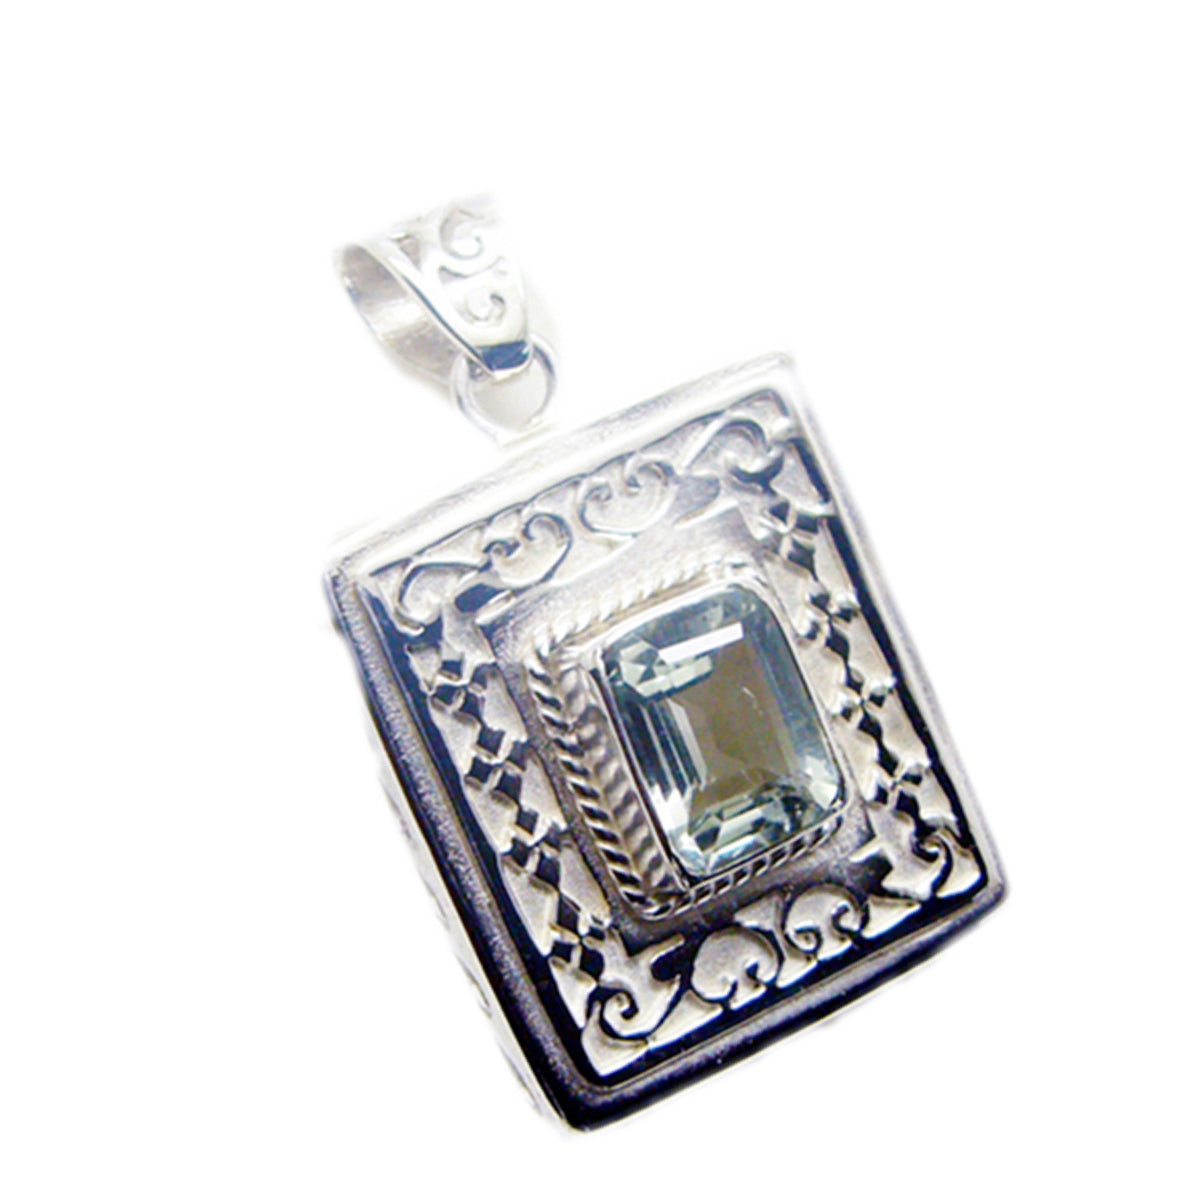 Riyo Comely Gems Octagon Faceted Green Green Amethyst Solid Silver Pendant Gift For Wedding